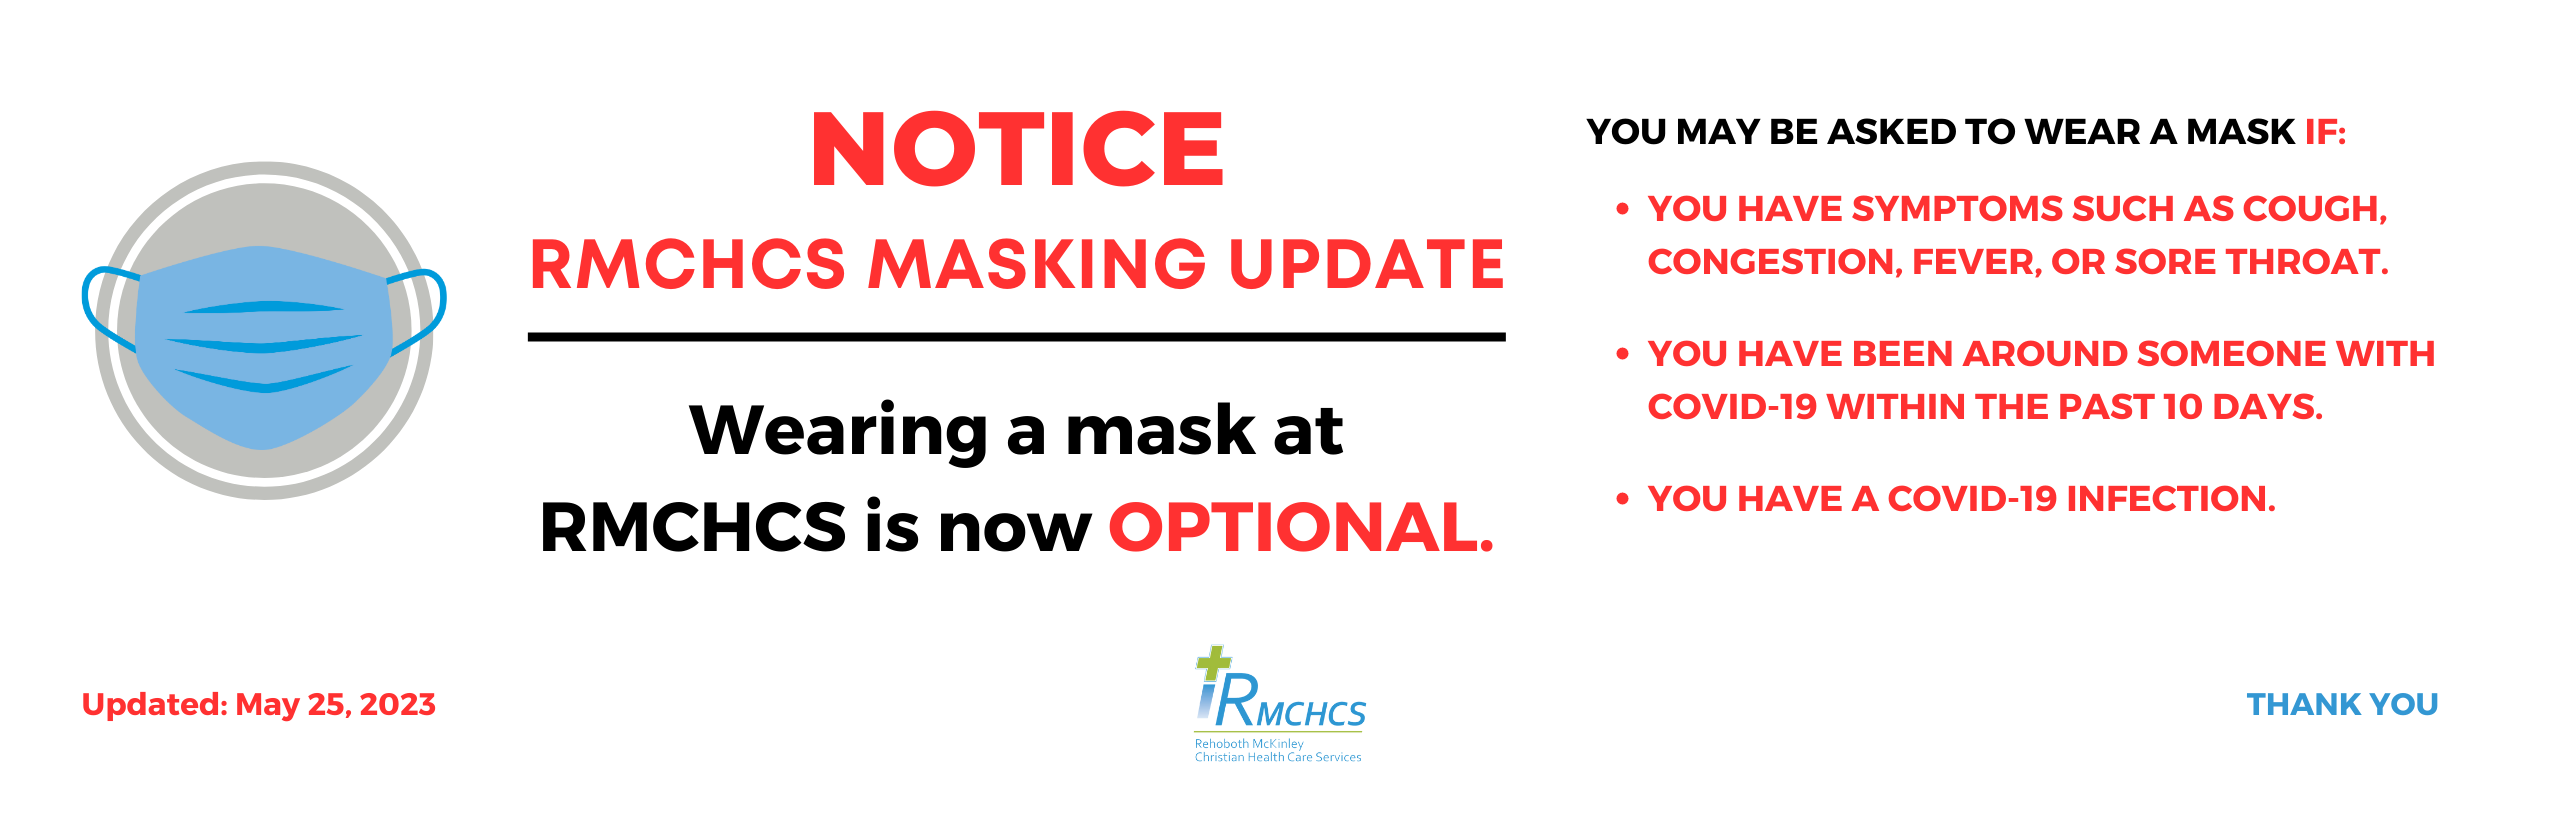 RMCHCS Notice. Masks are now optional at RMCHCS.